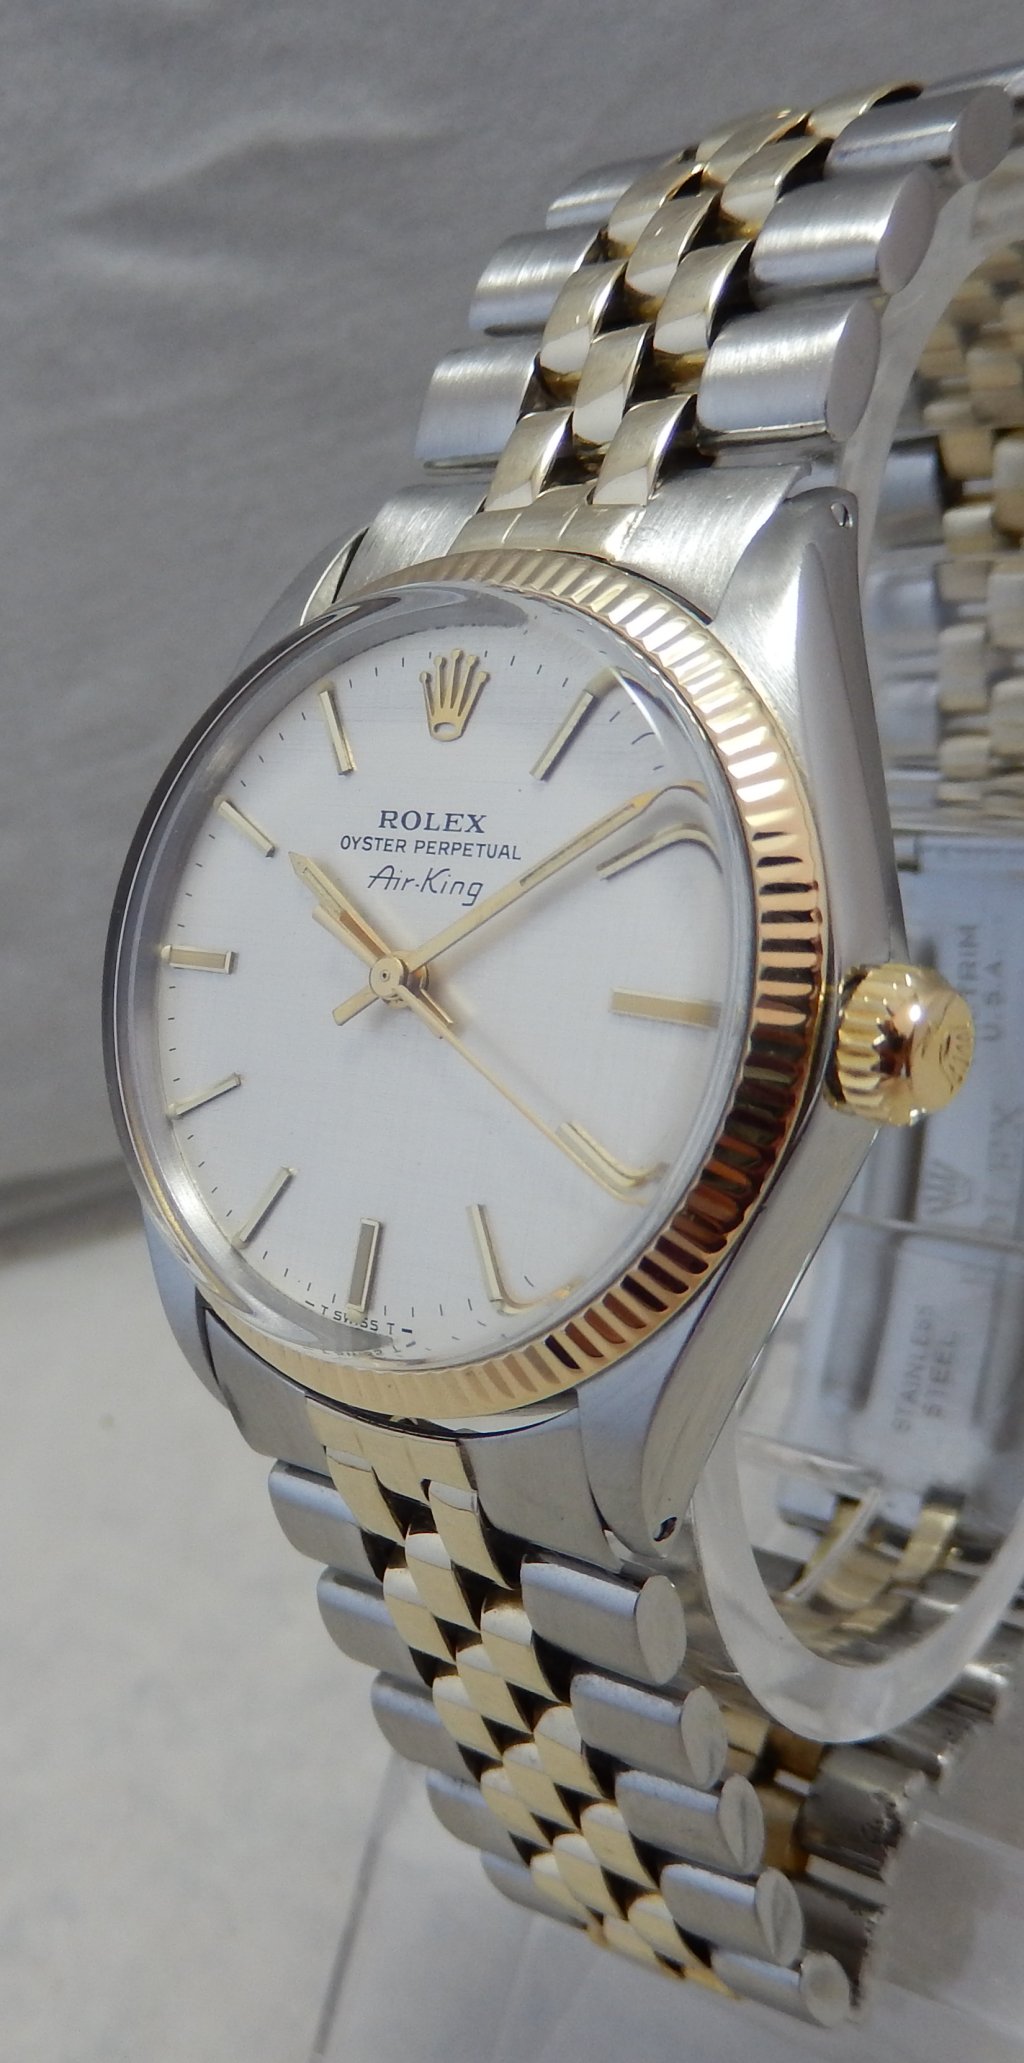 Rolex Oyster Perpetual Air-King 5501 